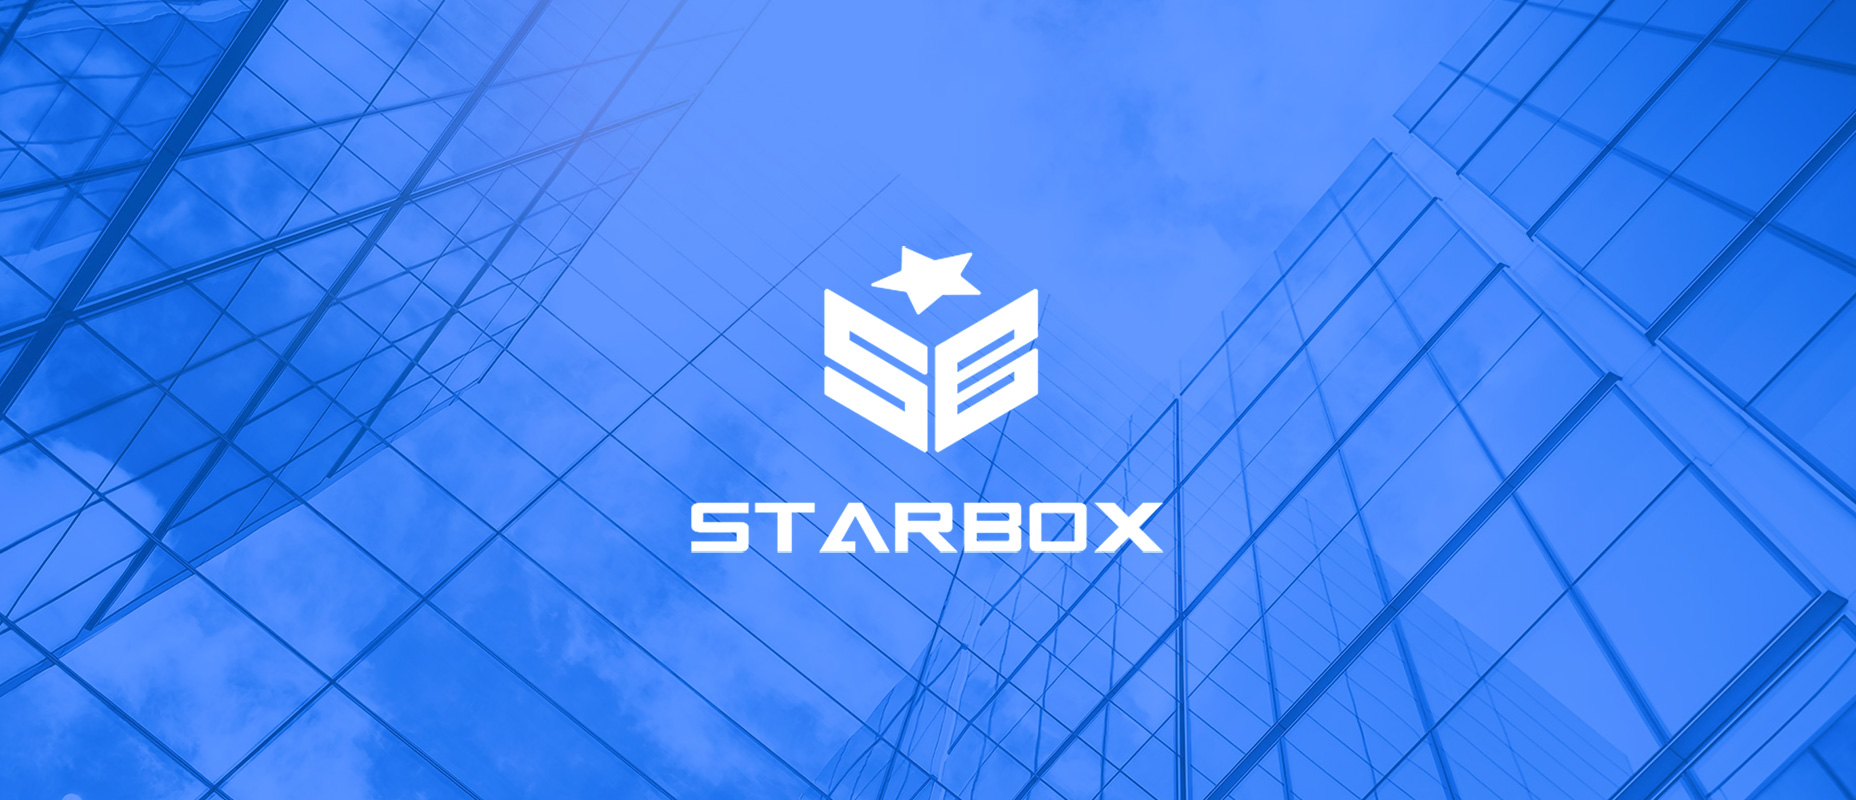 IPO of Starbox Group: Rebate Business from Malaysia